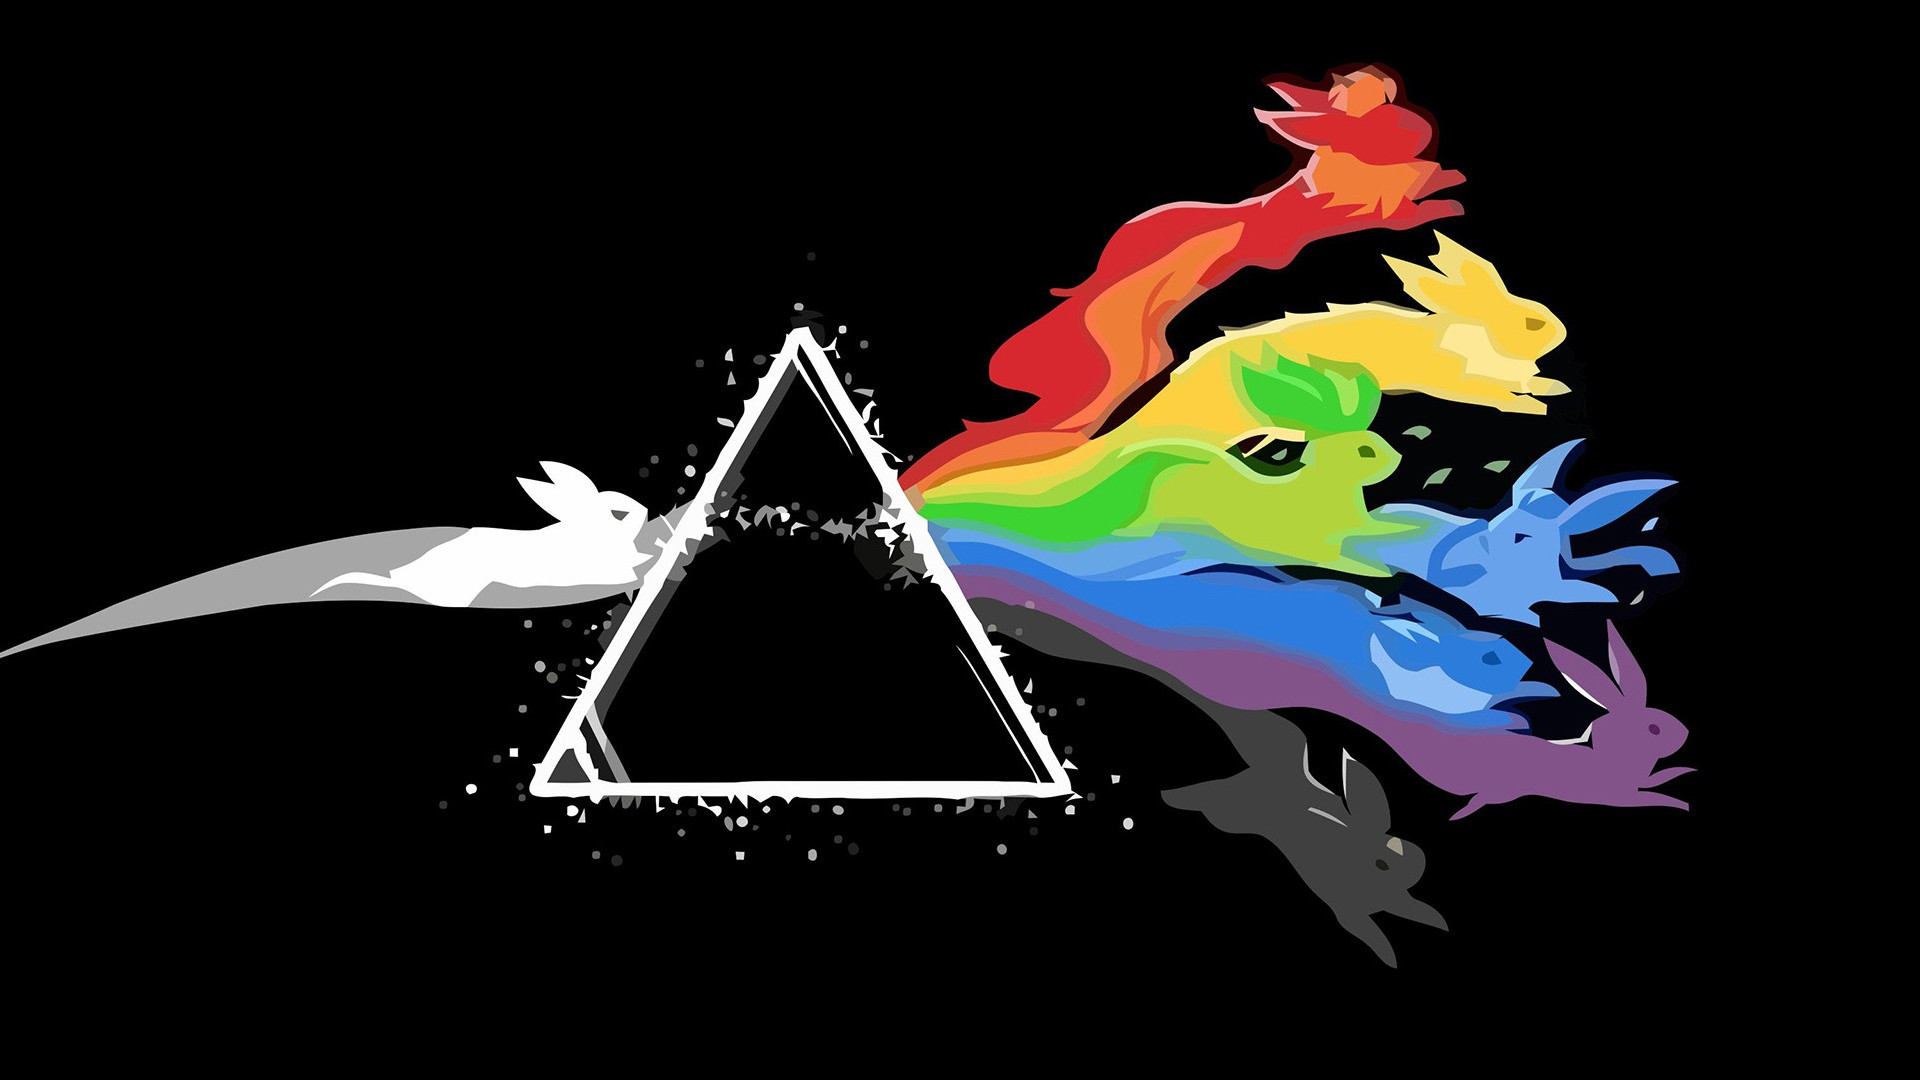 1920x1080 I guess Pink Floyd was a pokemon trainer.